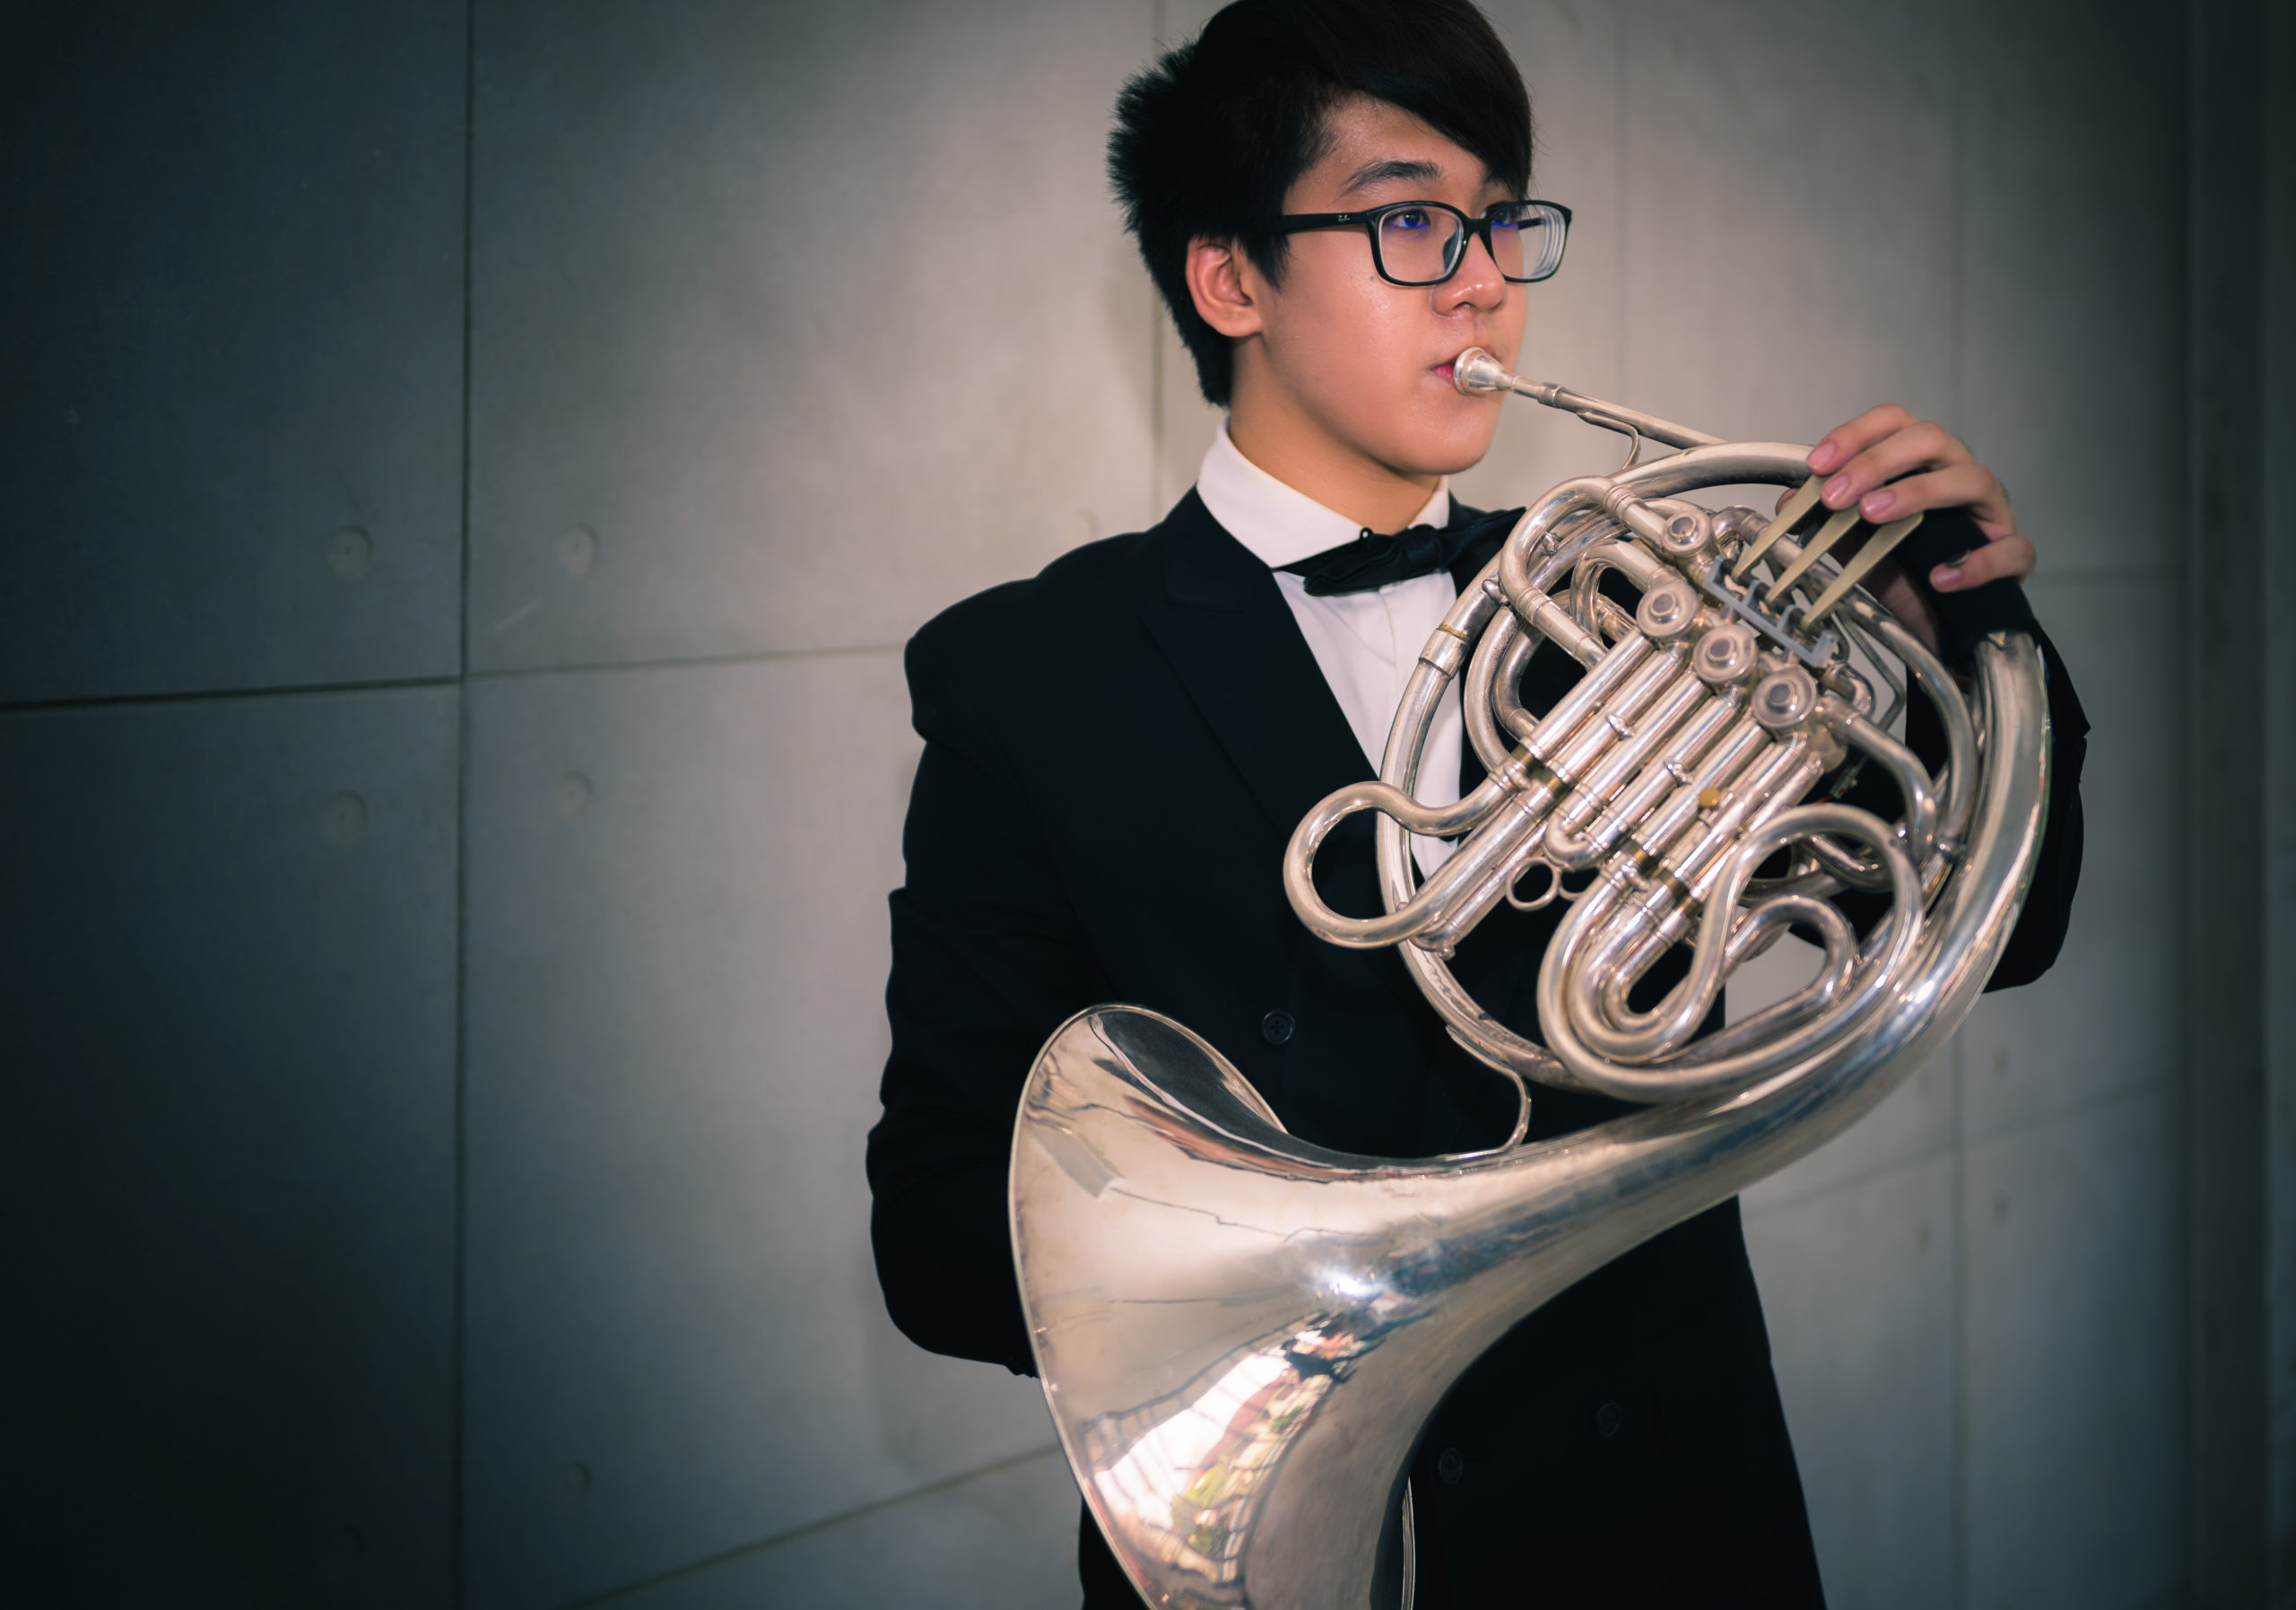 Difference Between Single And Double French Horn